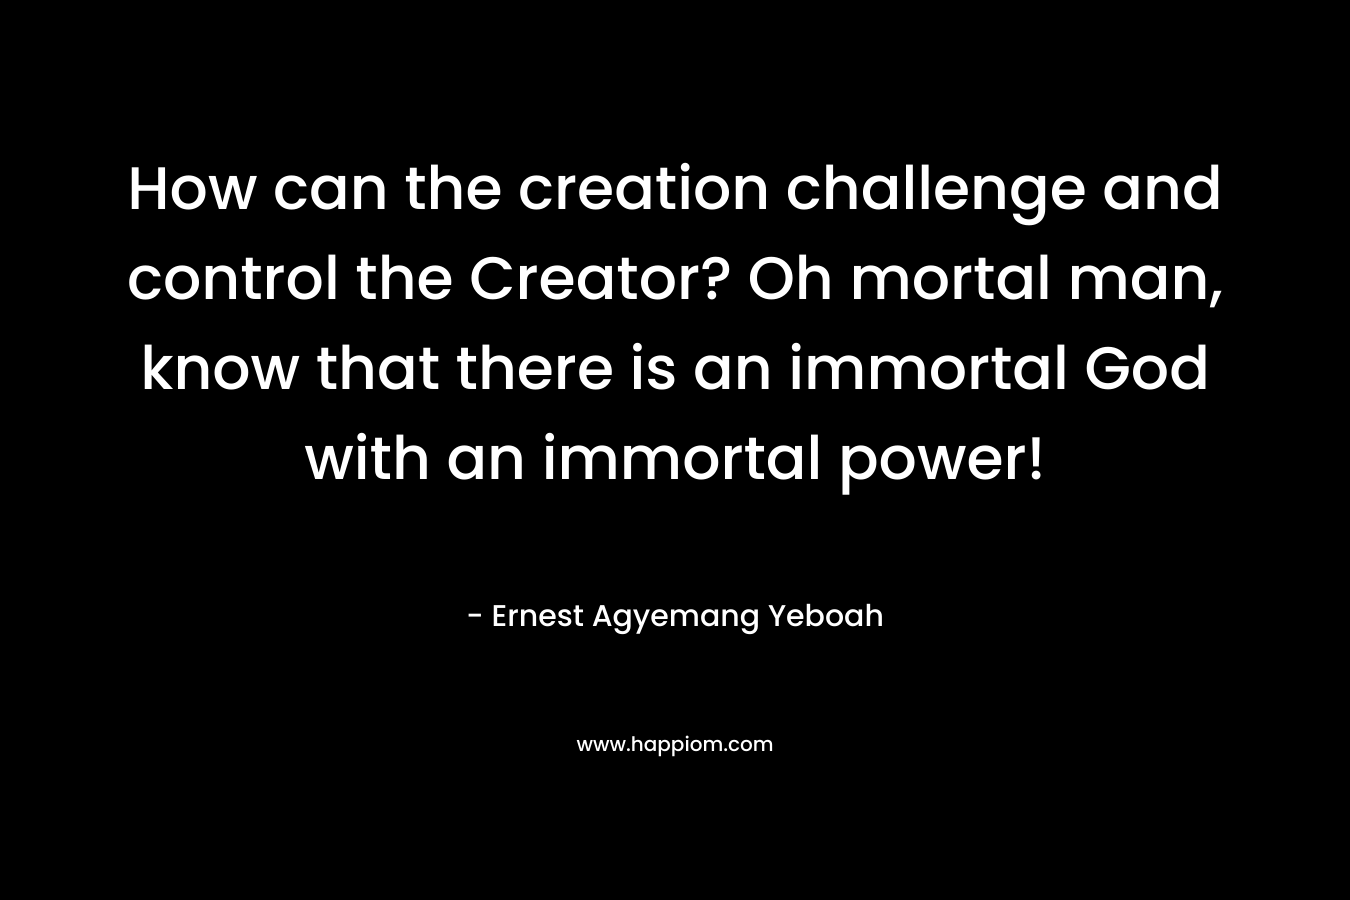 How can the creation challenge and control the Creator? Oh mortal man, know that there is an immortal God with an immortal power!